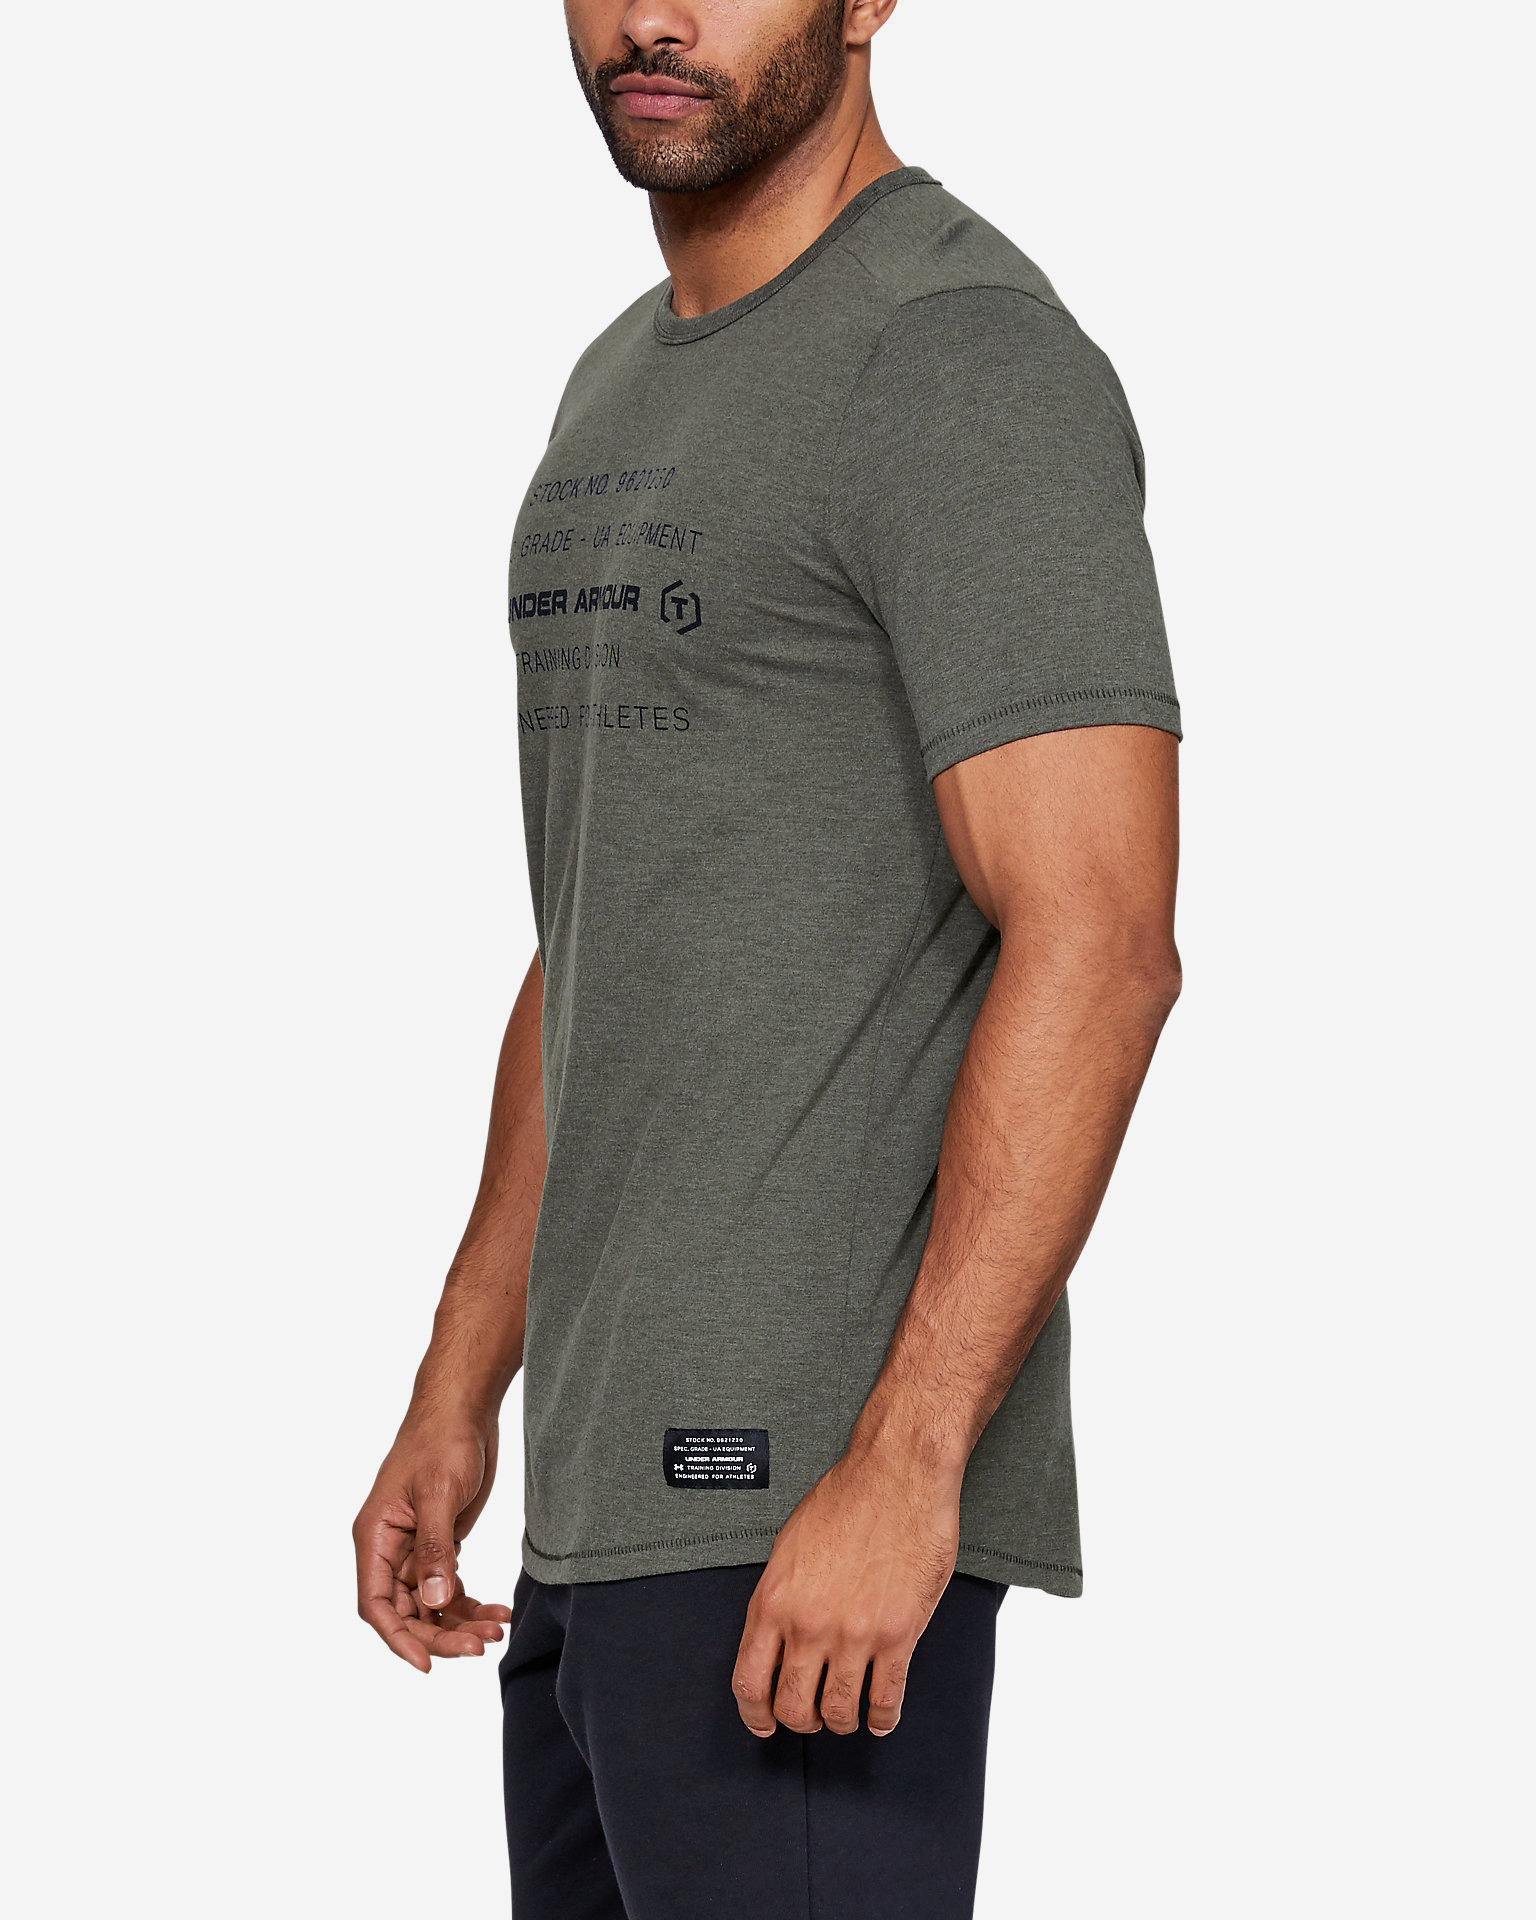 Grey L Under Armour Mens Sportstyle Tri-Blend Graphic Sports T-Shirt 